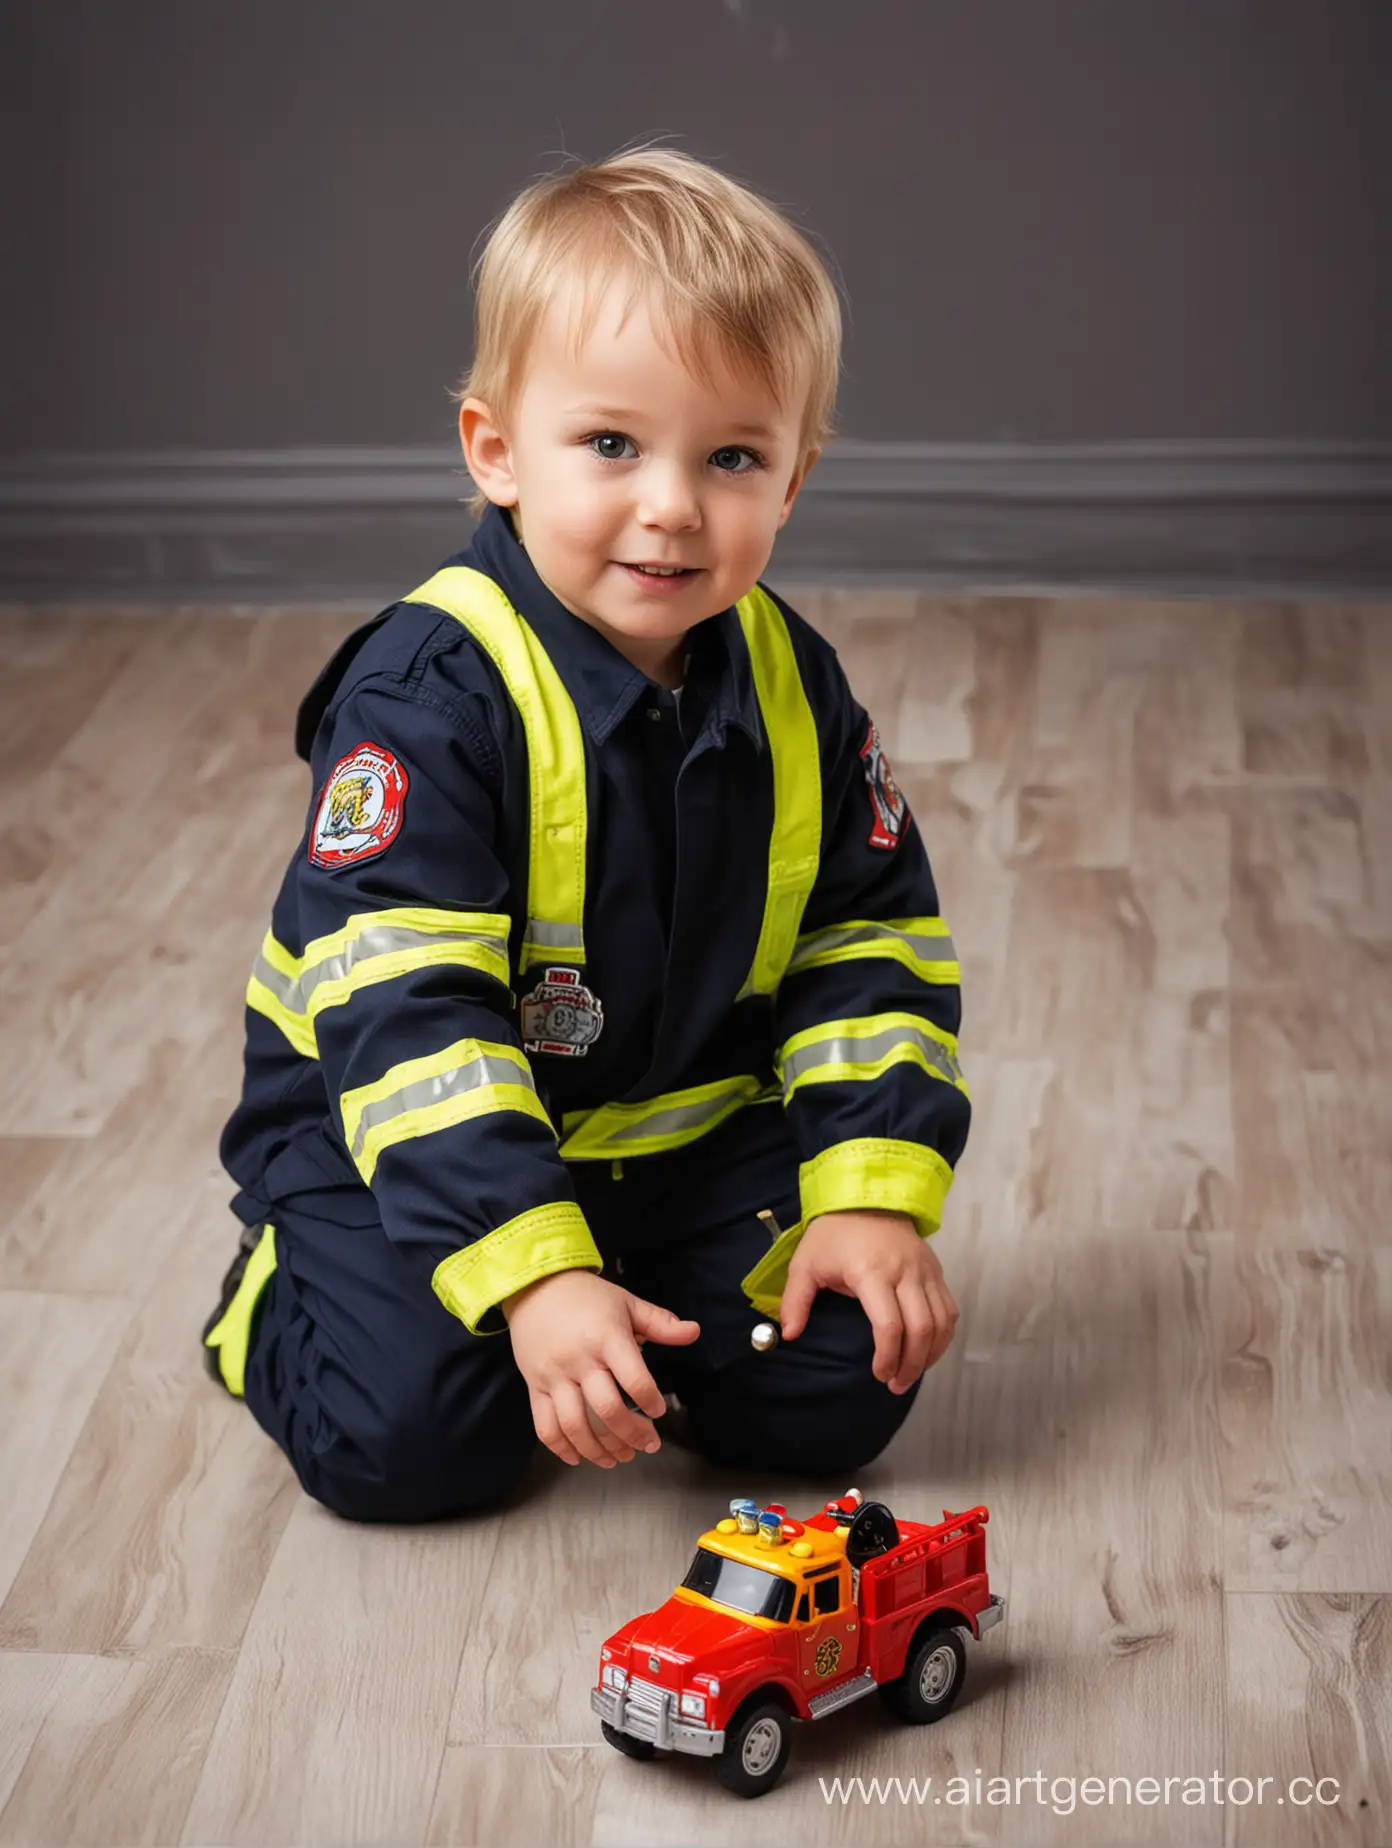 Firefighter-Costume-Child-Playing-with-Toy-Cars-on-Wooden-Floor